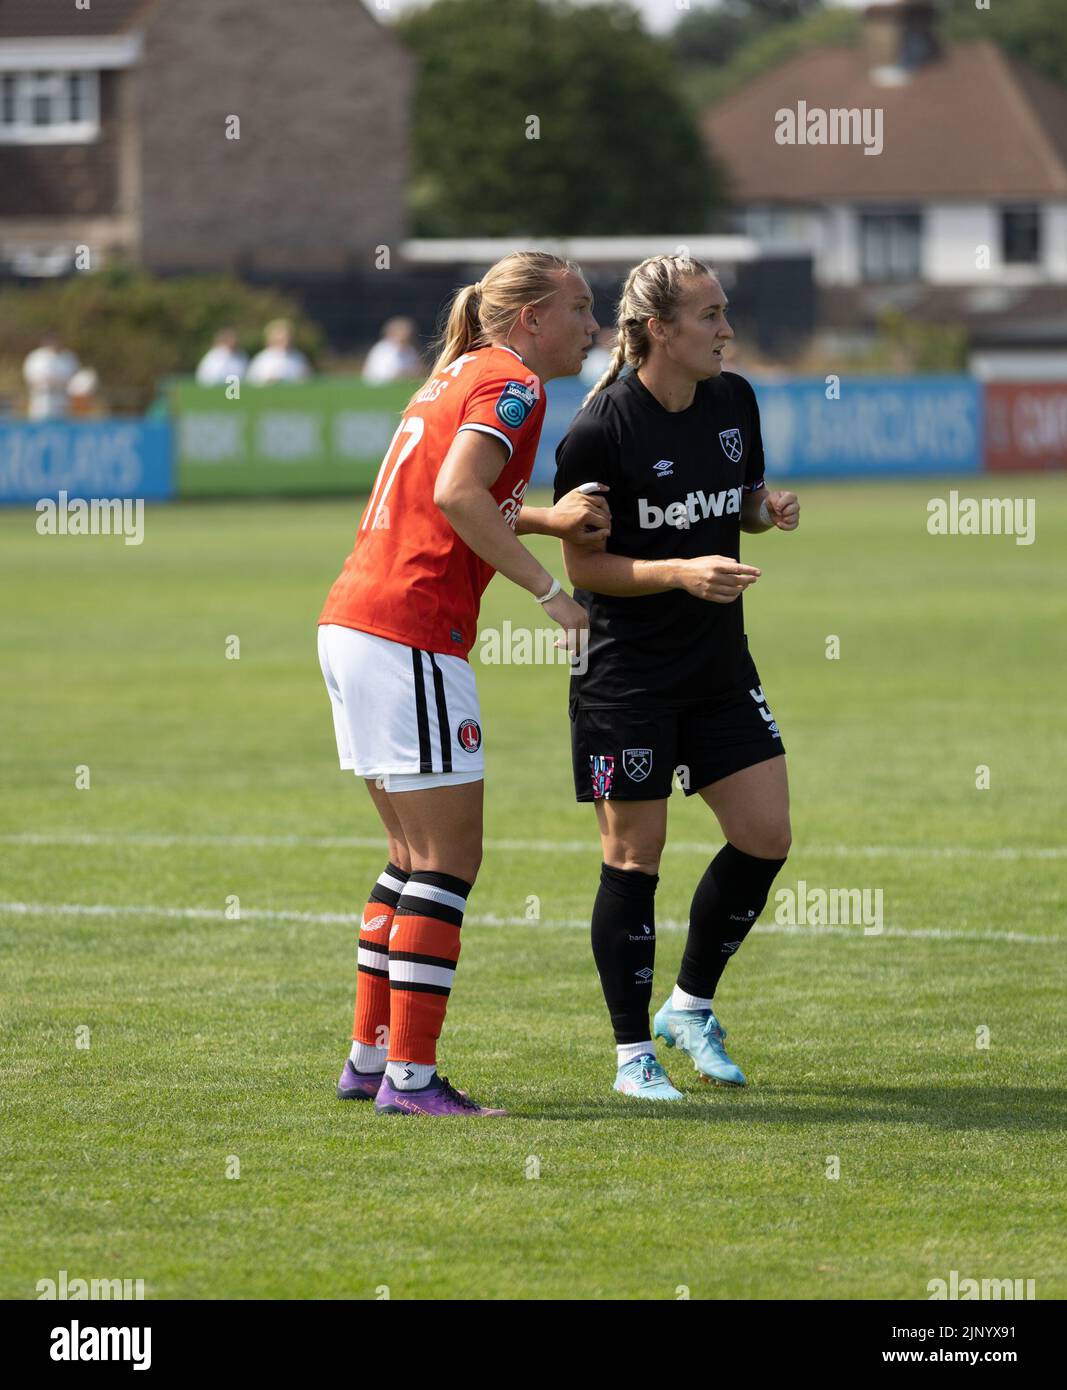 Catford, UK. 14th Aug, 2022. The Oakwood Stadium, Catford, 14 aug 2022 Kiera Skeels (CHA) and Claudia Walker (WHU) during a friendly game in August 2022 (Bettina Weissensteiner/SPP) Credit: SPP Sport Press Photo. /Alamy Live News Stock Photo